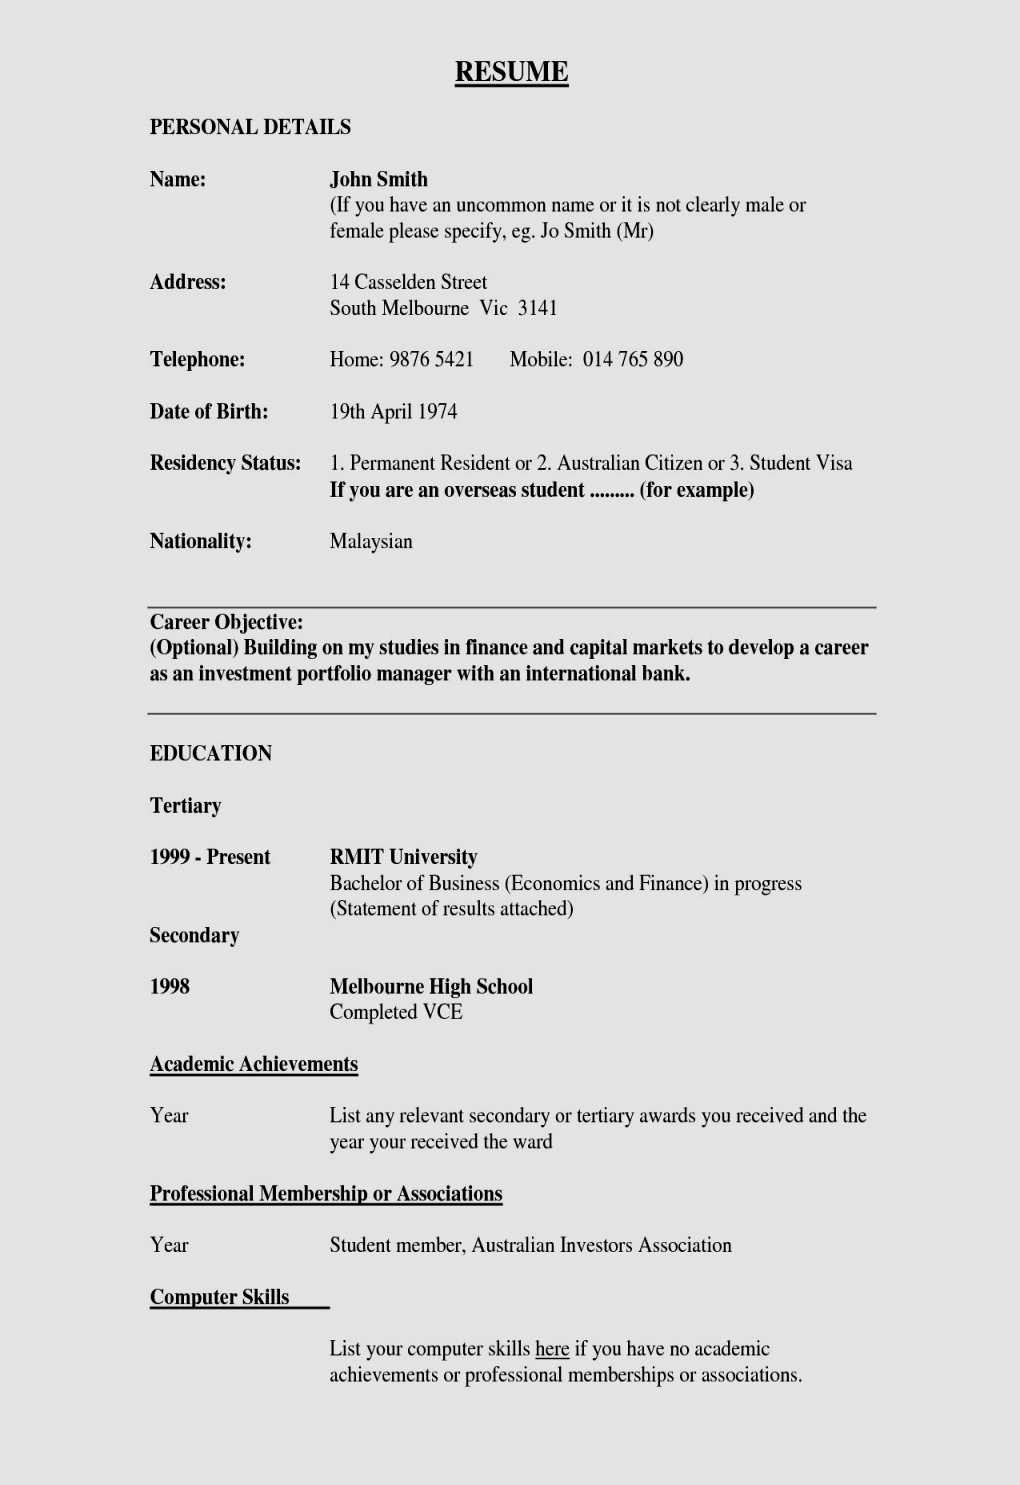 Make A Resume For Free How To Create Resume Format How To Make Resume Template Hospitality Free Resume Templates Of How To Create Resume Format make a resume for free|wikiresume.com